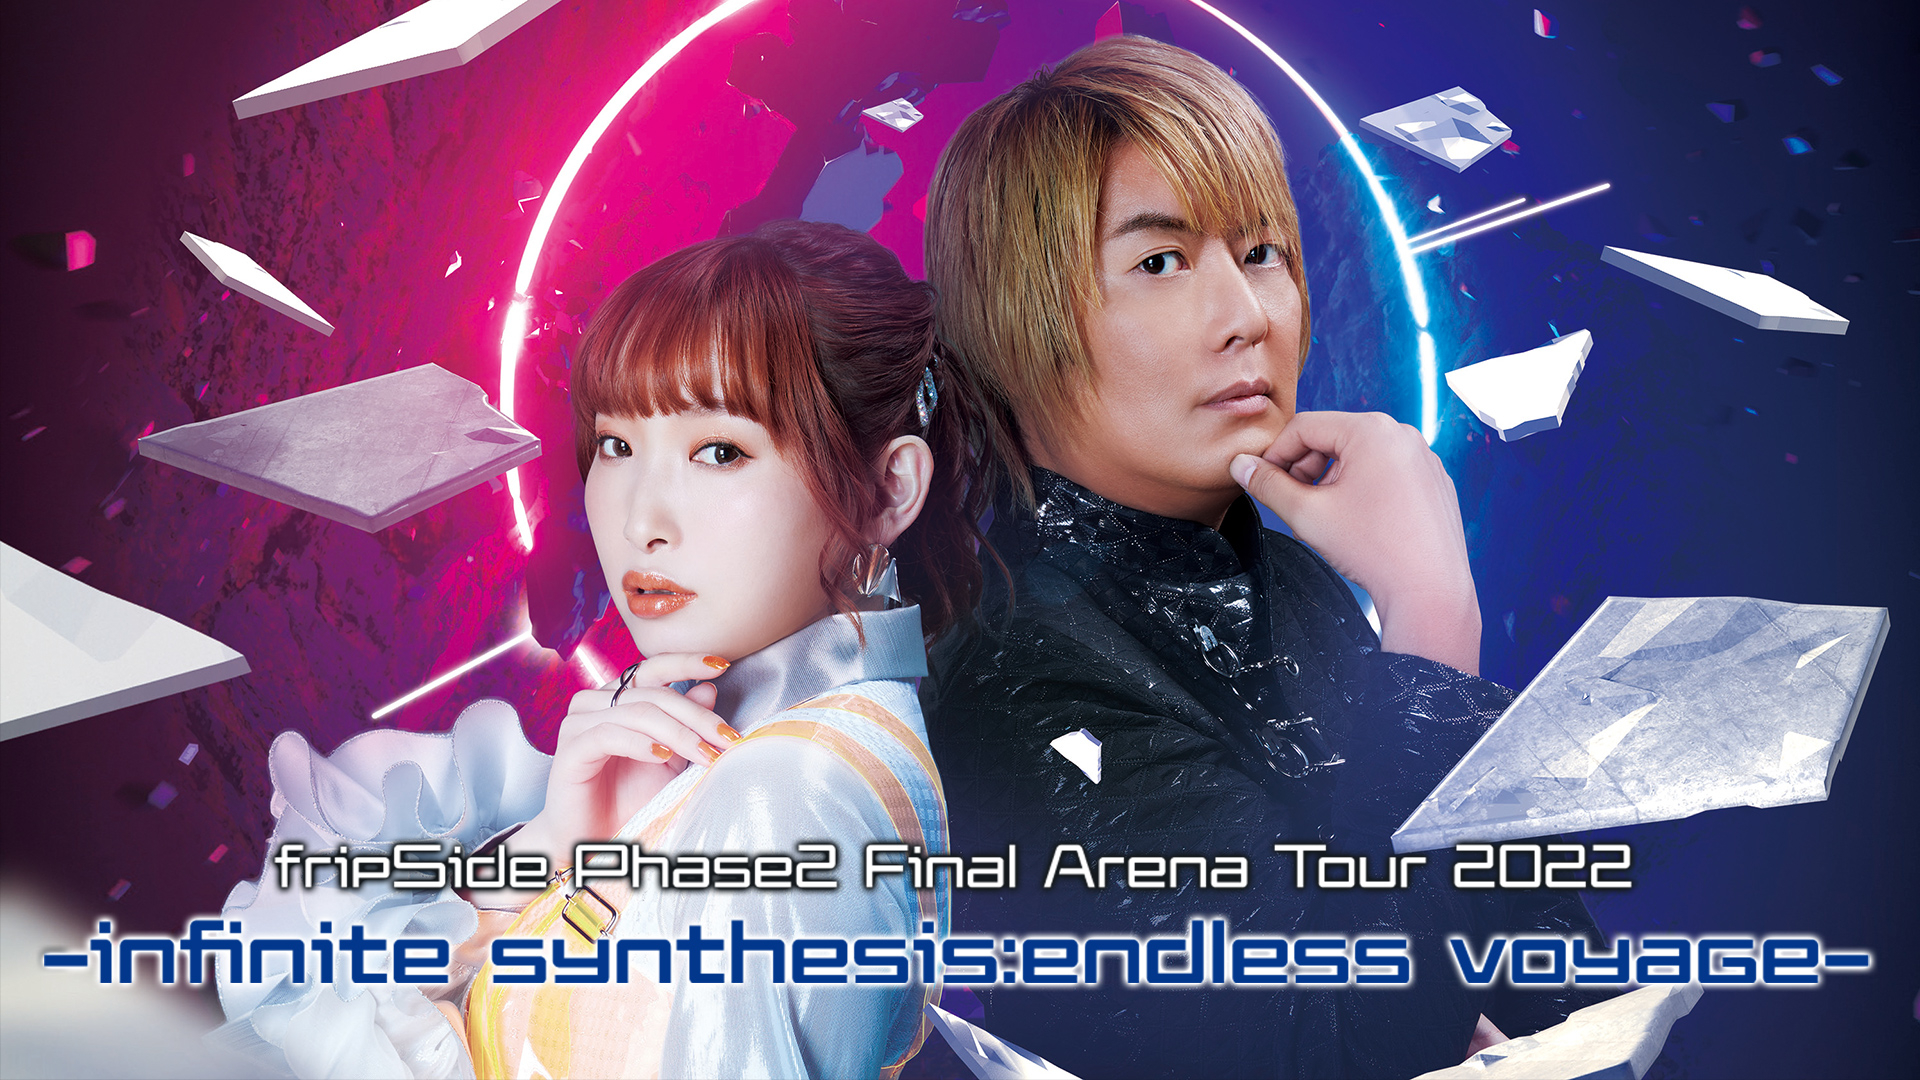 fripSide/Phase2 Final Arena Tour 2022-BD 【新商品！】 - www